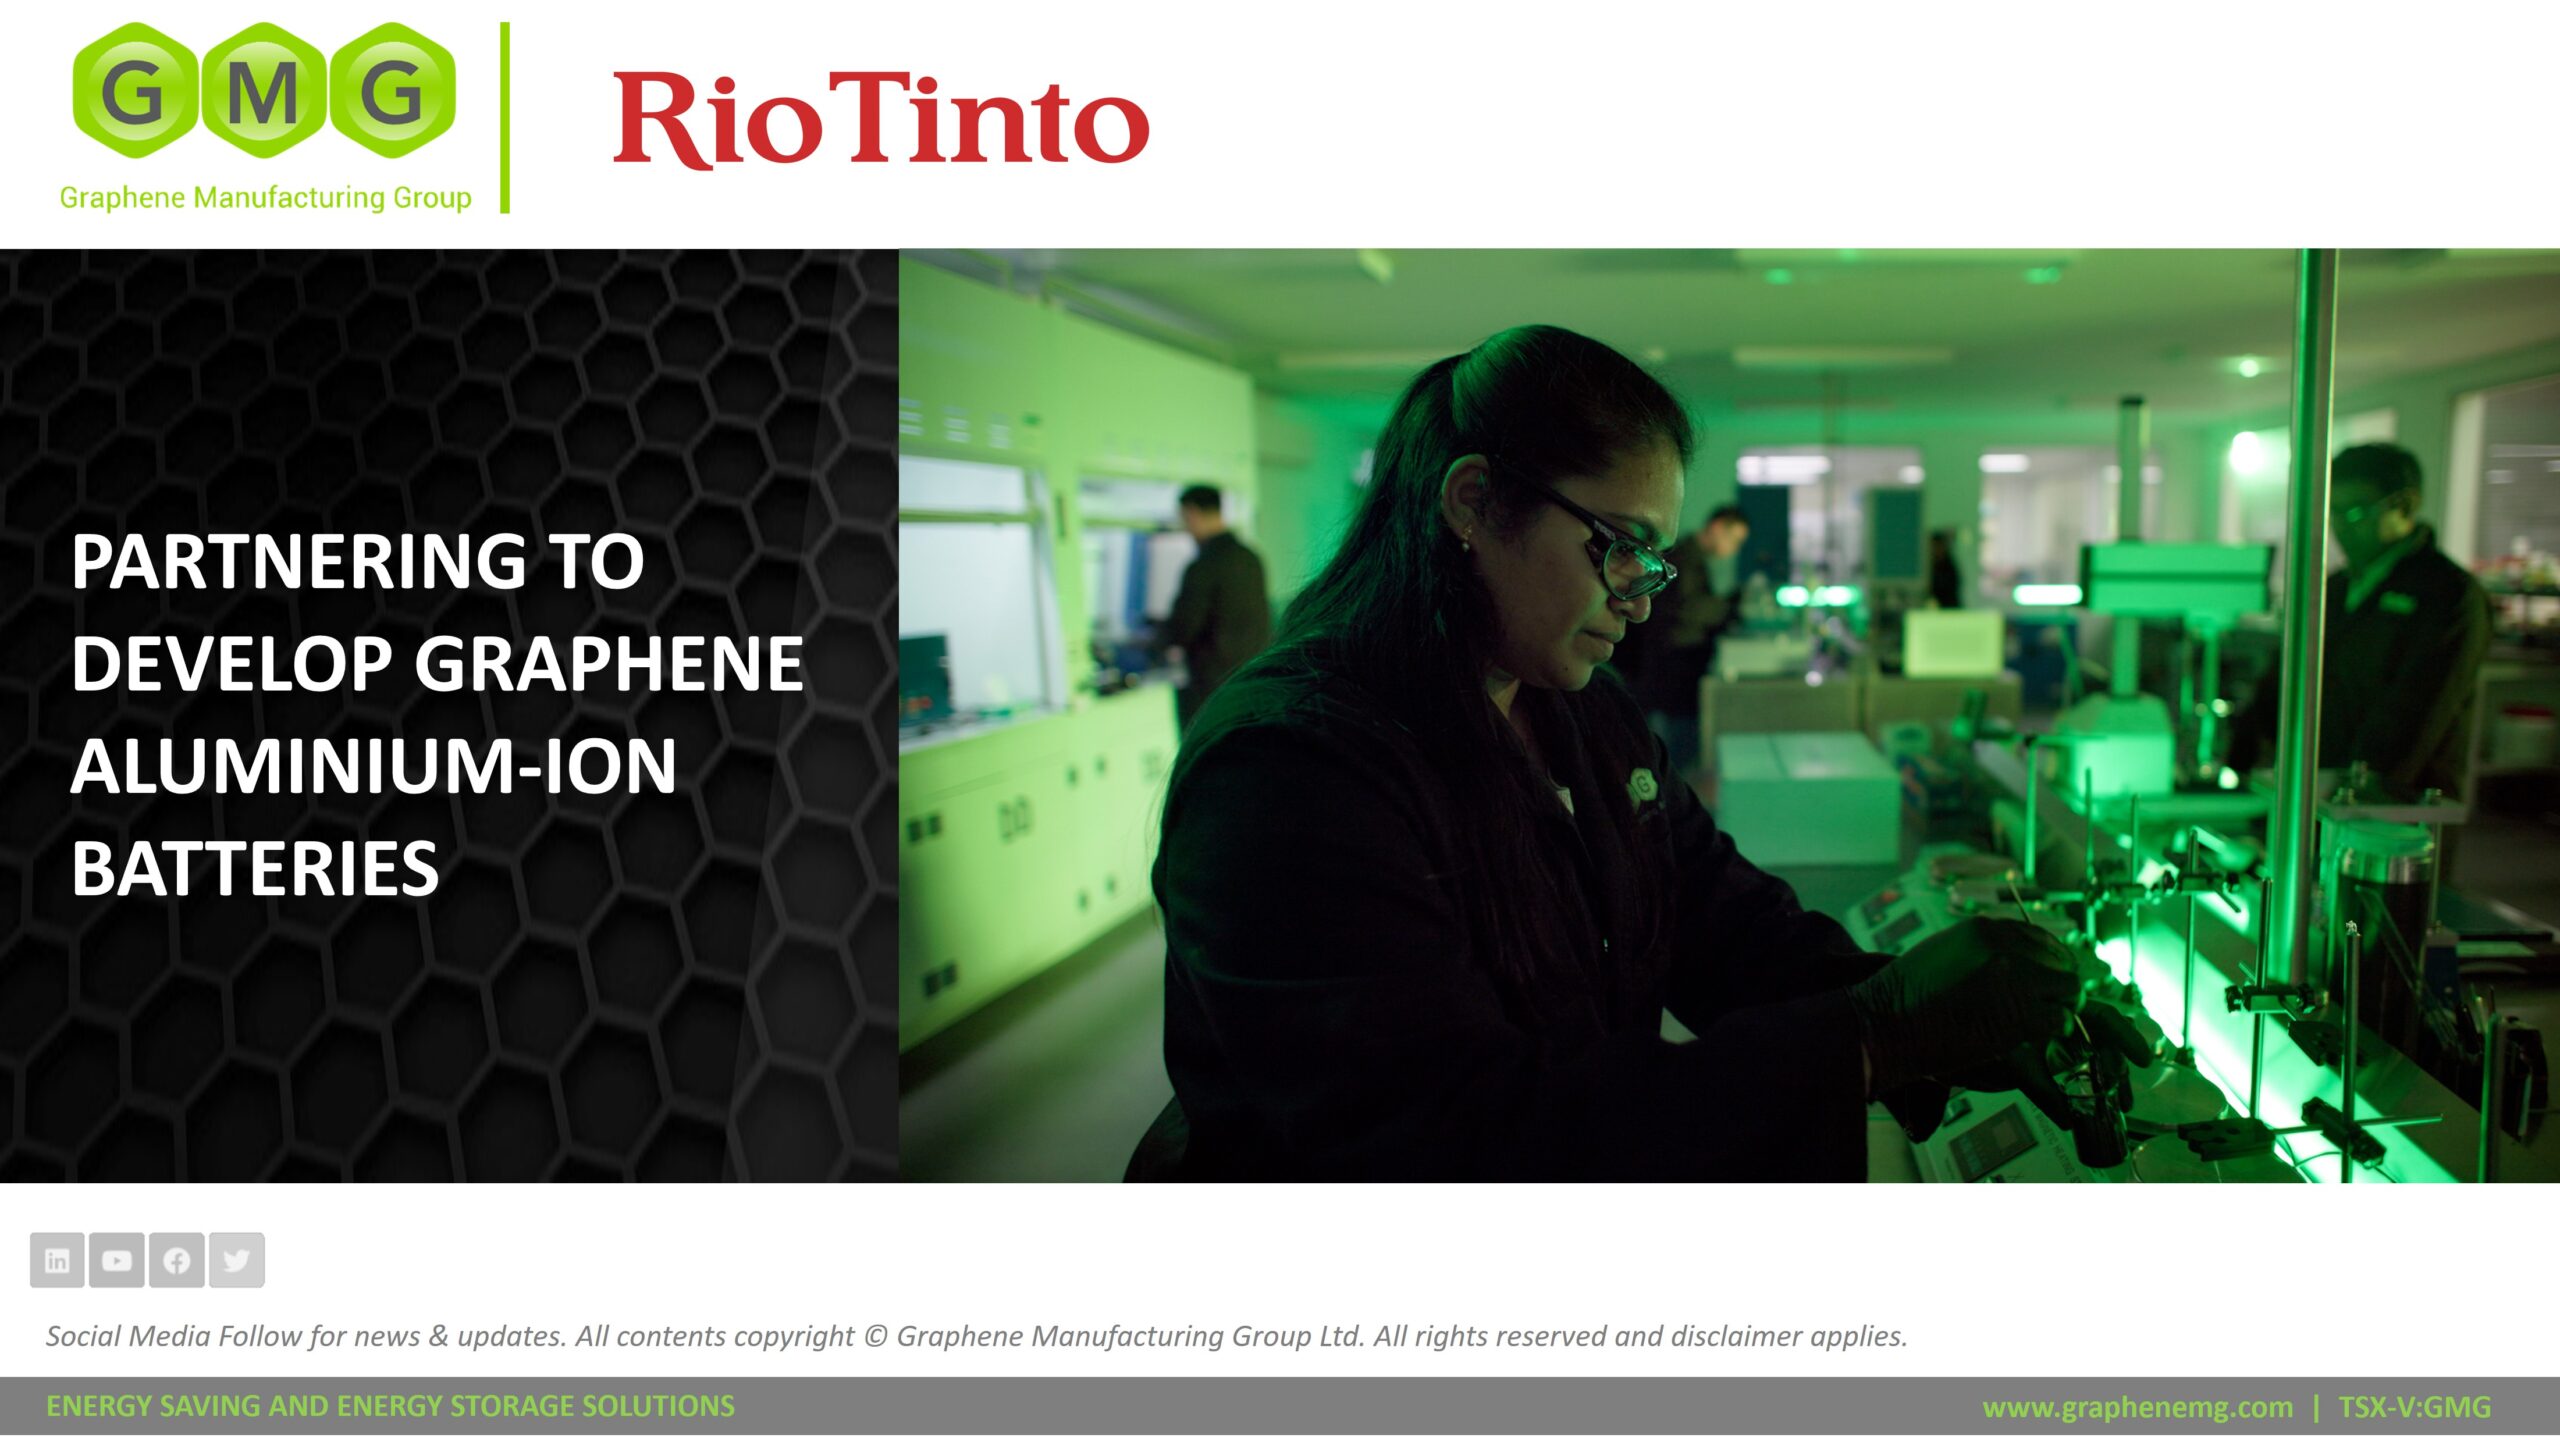 Rio Tinto | Graphene Manufacturing Group - partnering to develop graphene aluminium ion batteries